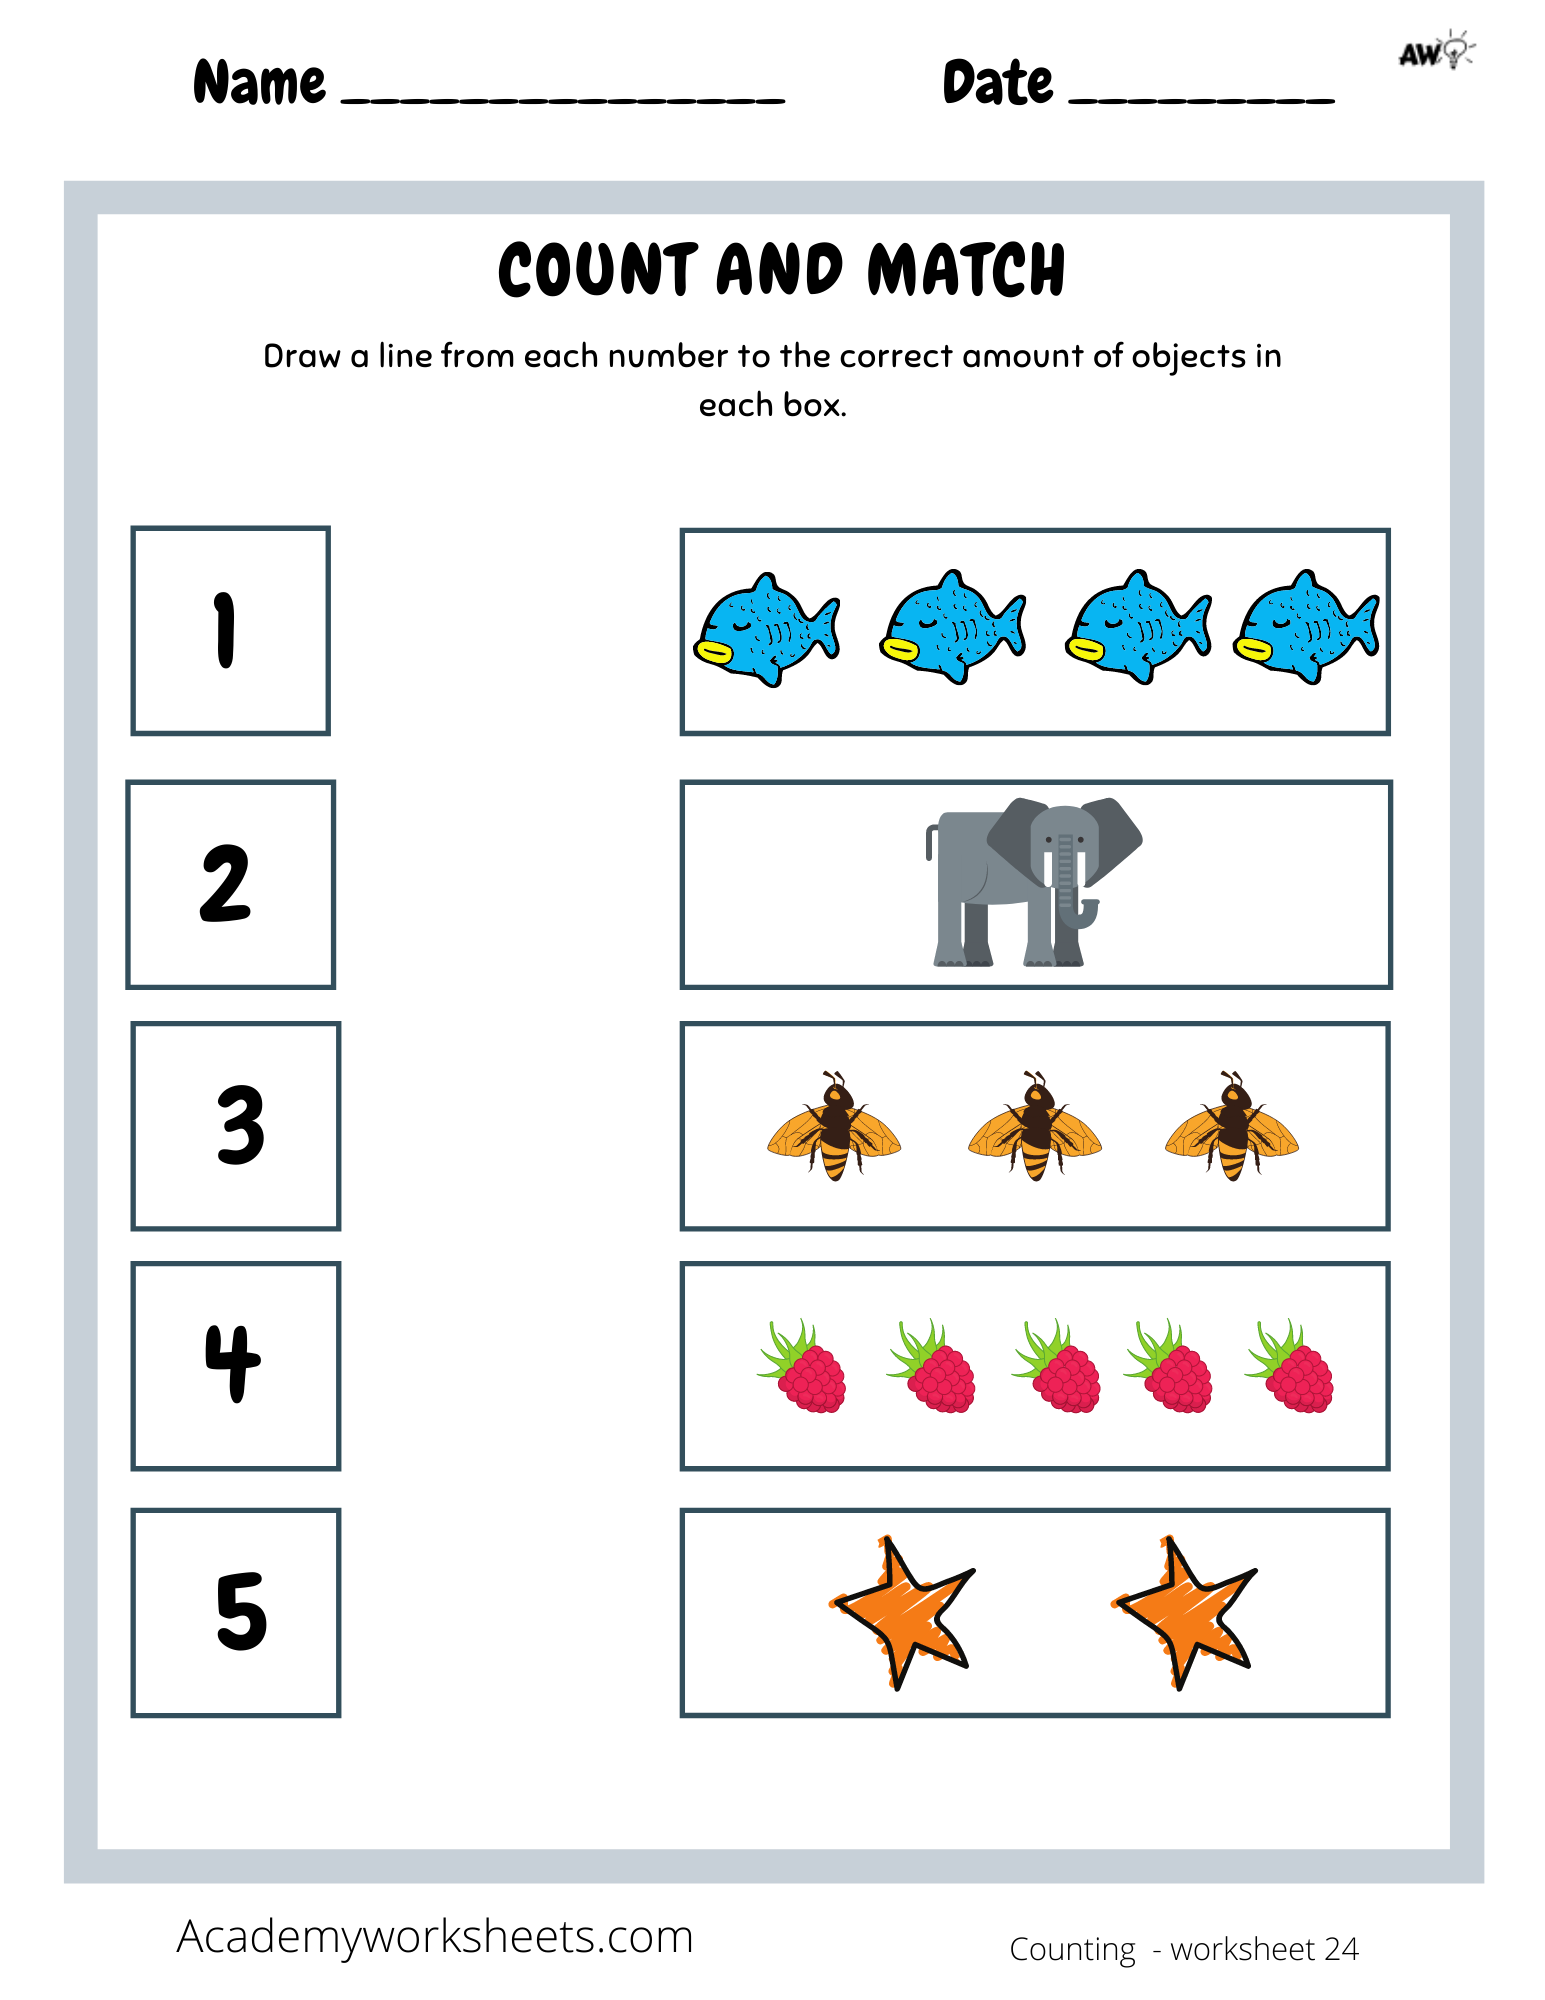 Count and Match Numbers 21-21 Worksheets - Academy Worksheets Pertaining To Counting By 5s Worksheet